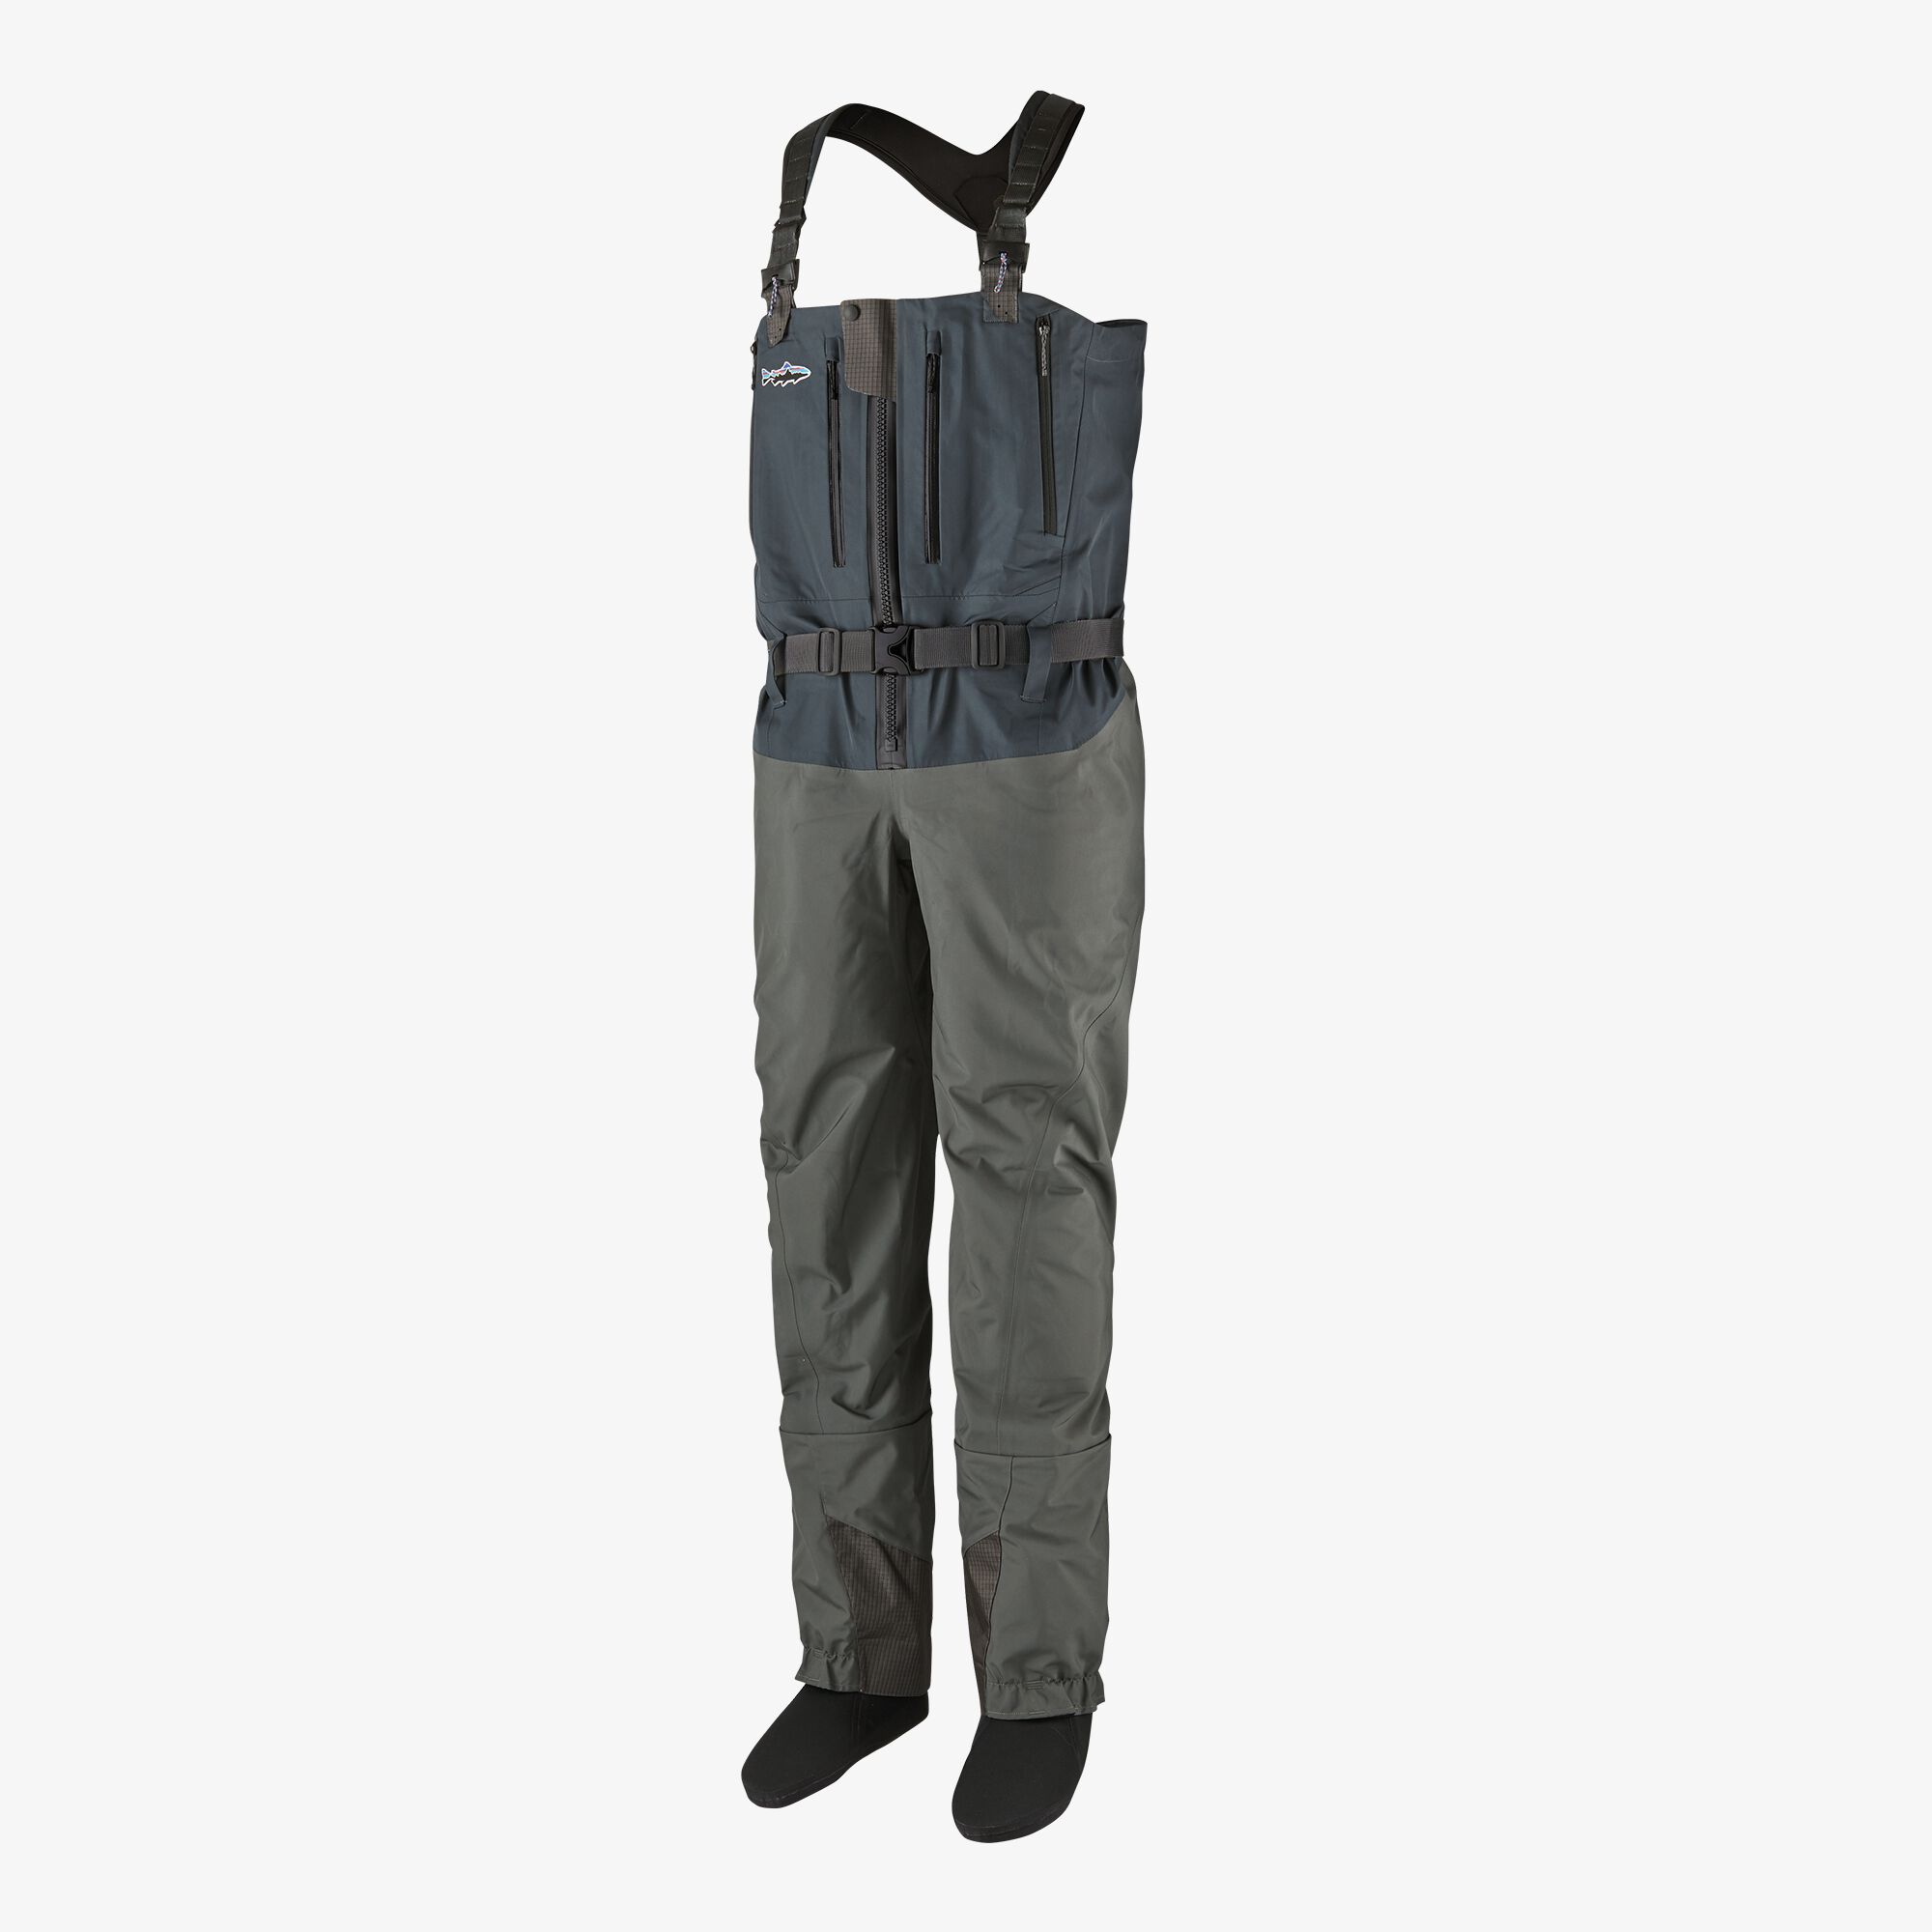 PATAGONIA SWIFTCURRENT EXPEDITION ZIP-FRONT WADER - FORGE GREY - SSS